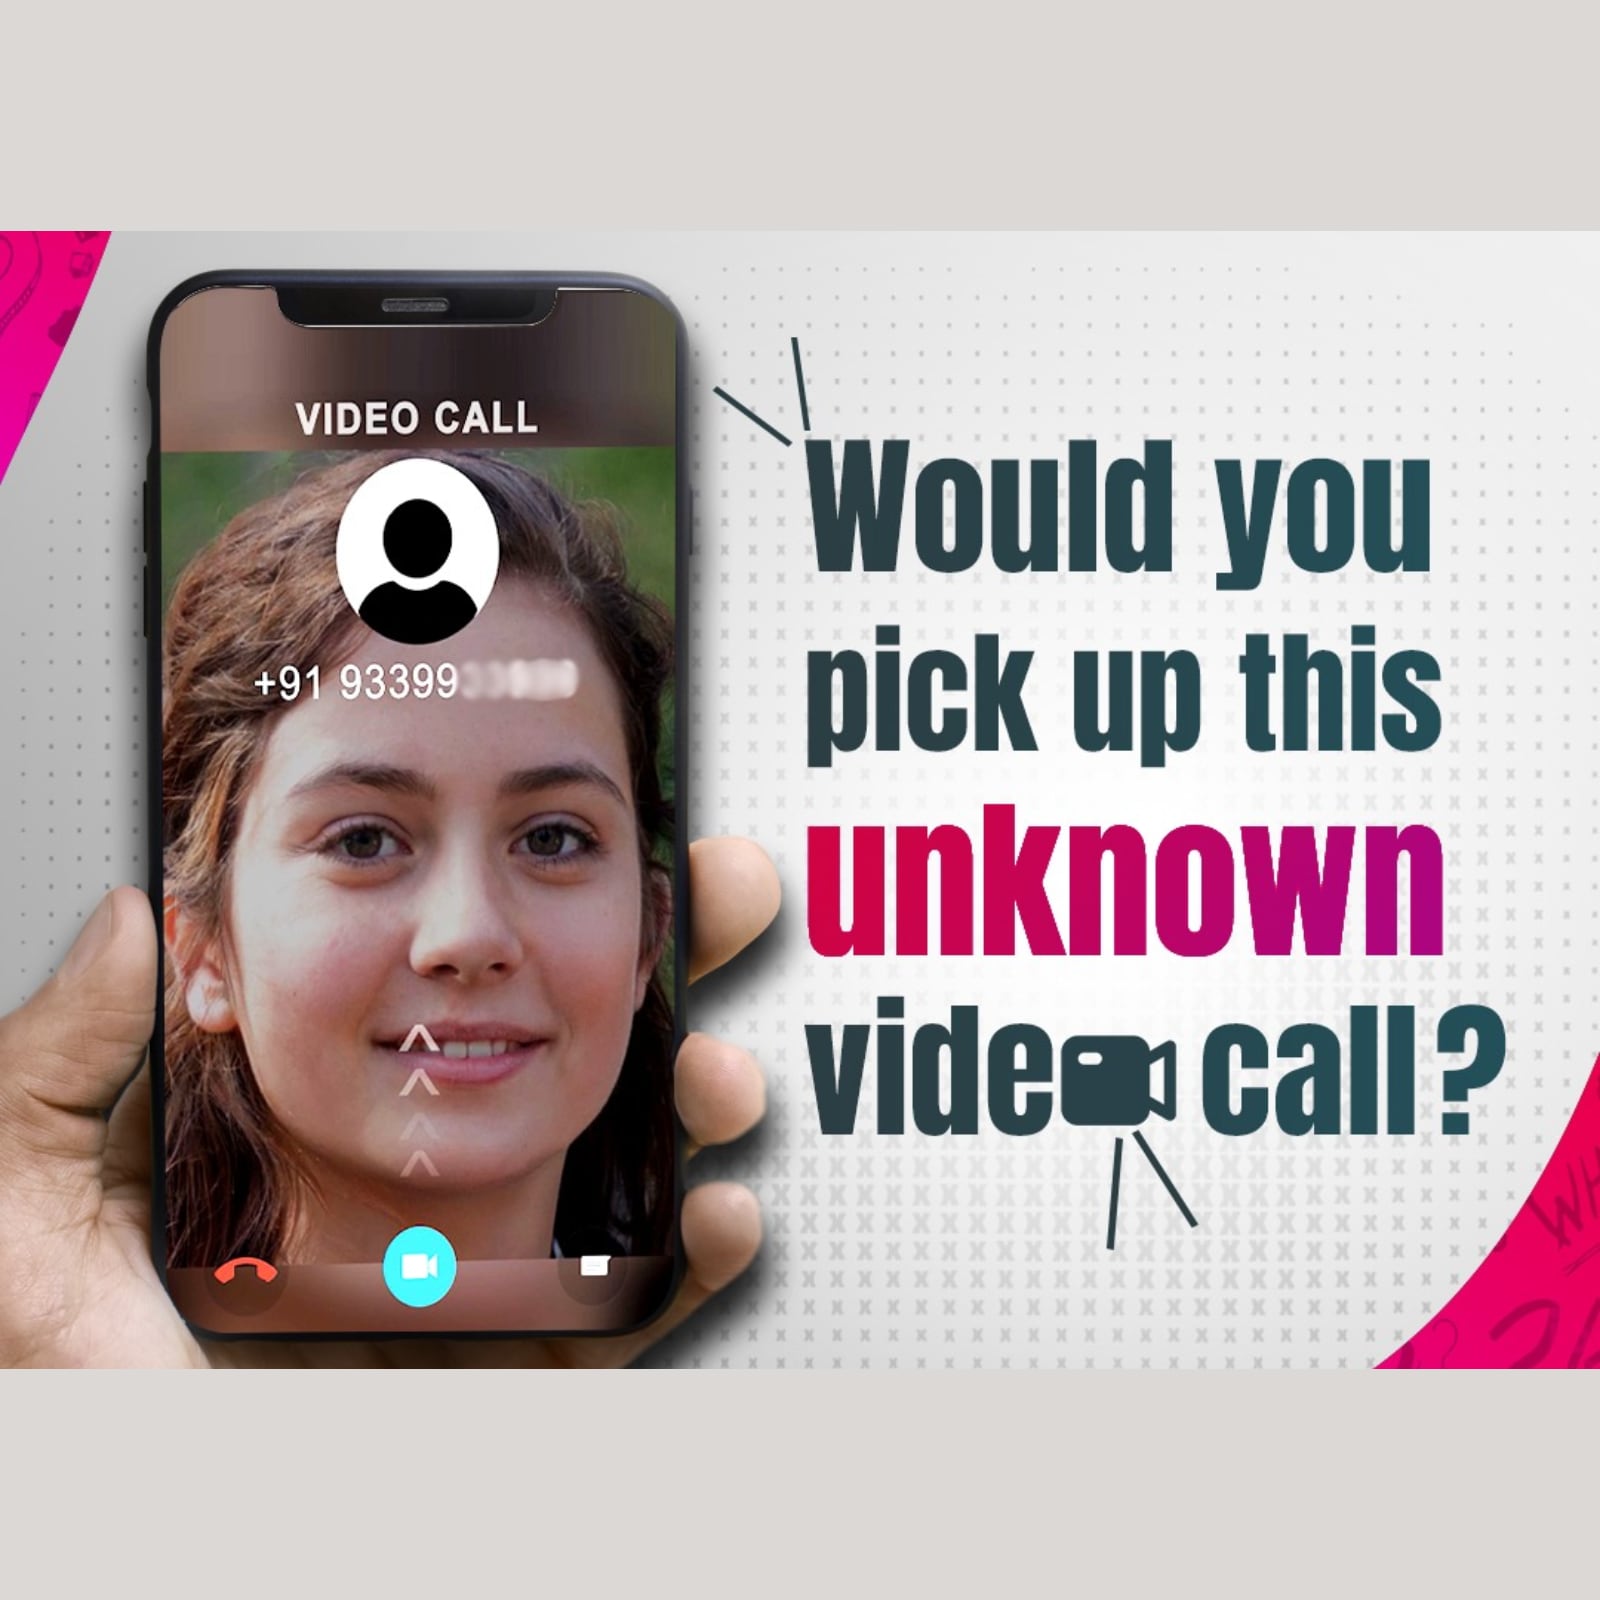 Hacker Anonymous calling you - Video call from hacker and chats simulator